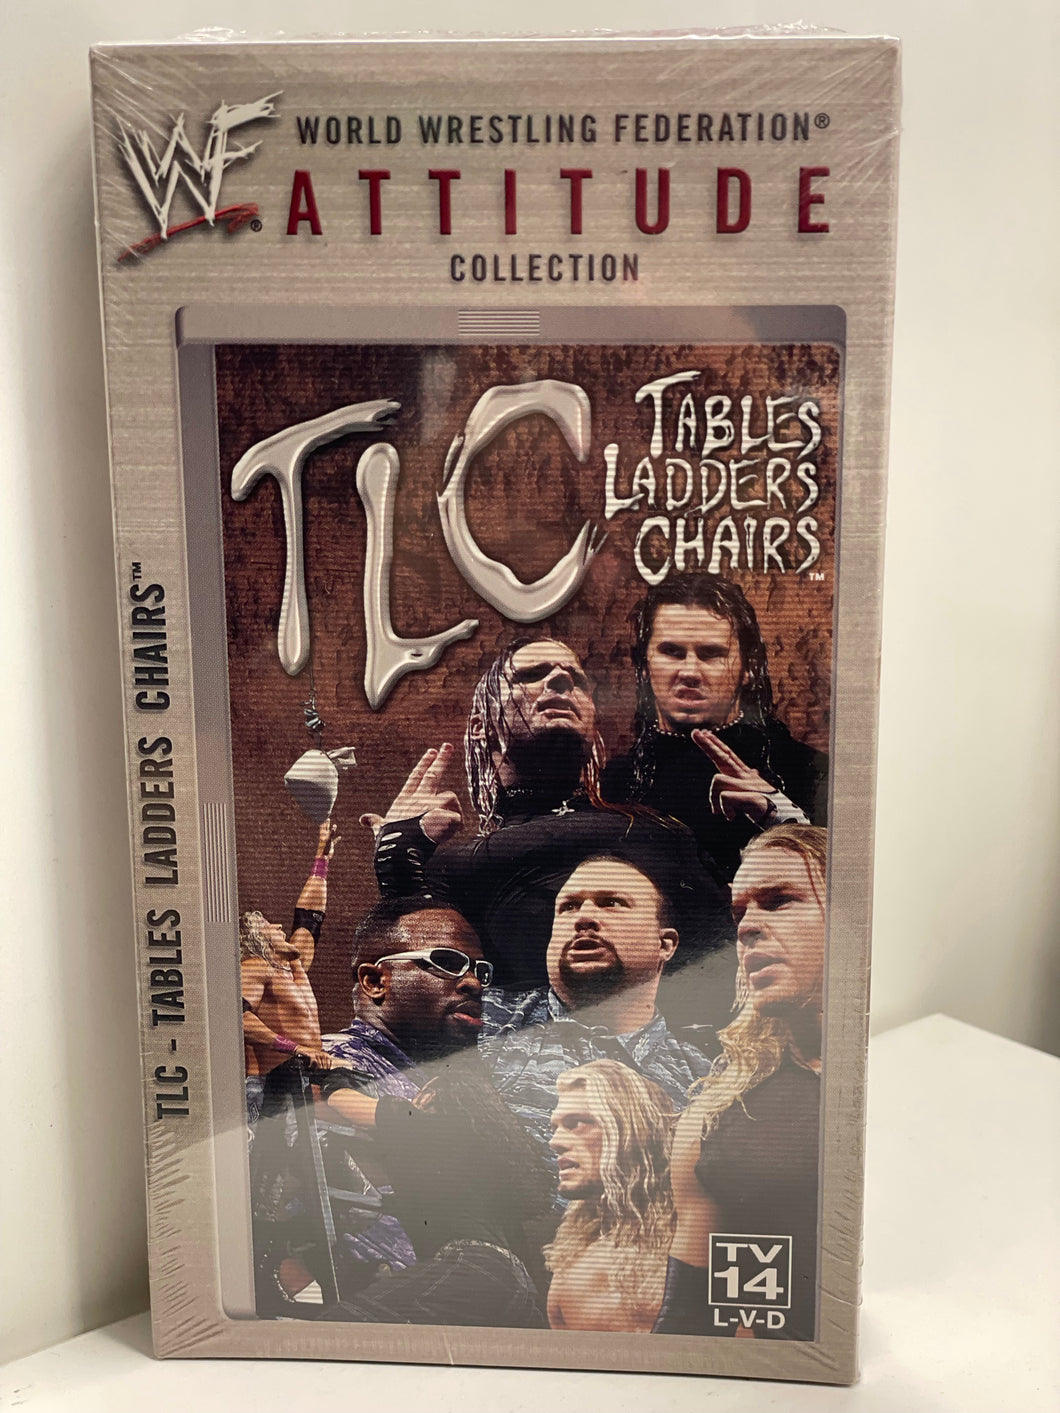 WWF Attitude Collection TLC Tables Ladders Chairs VHS